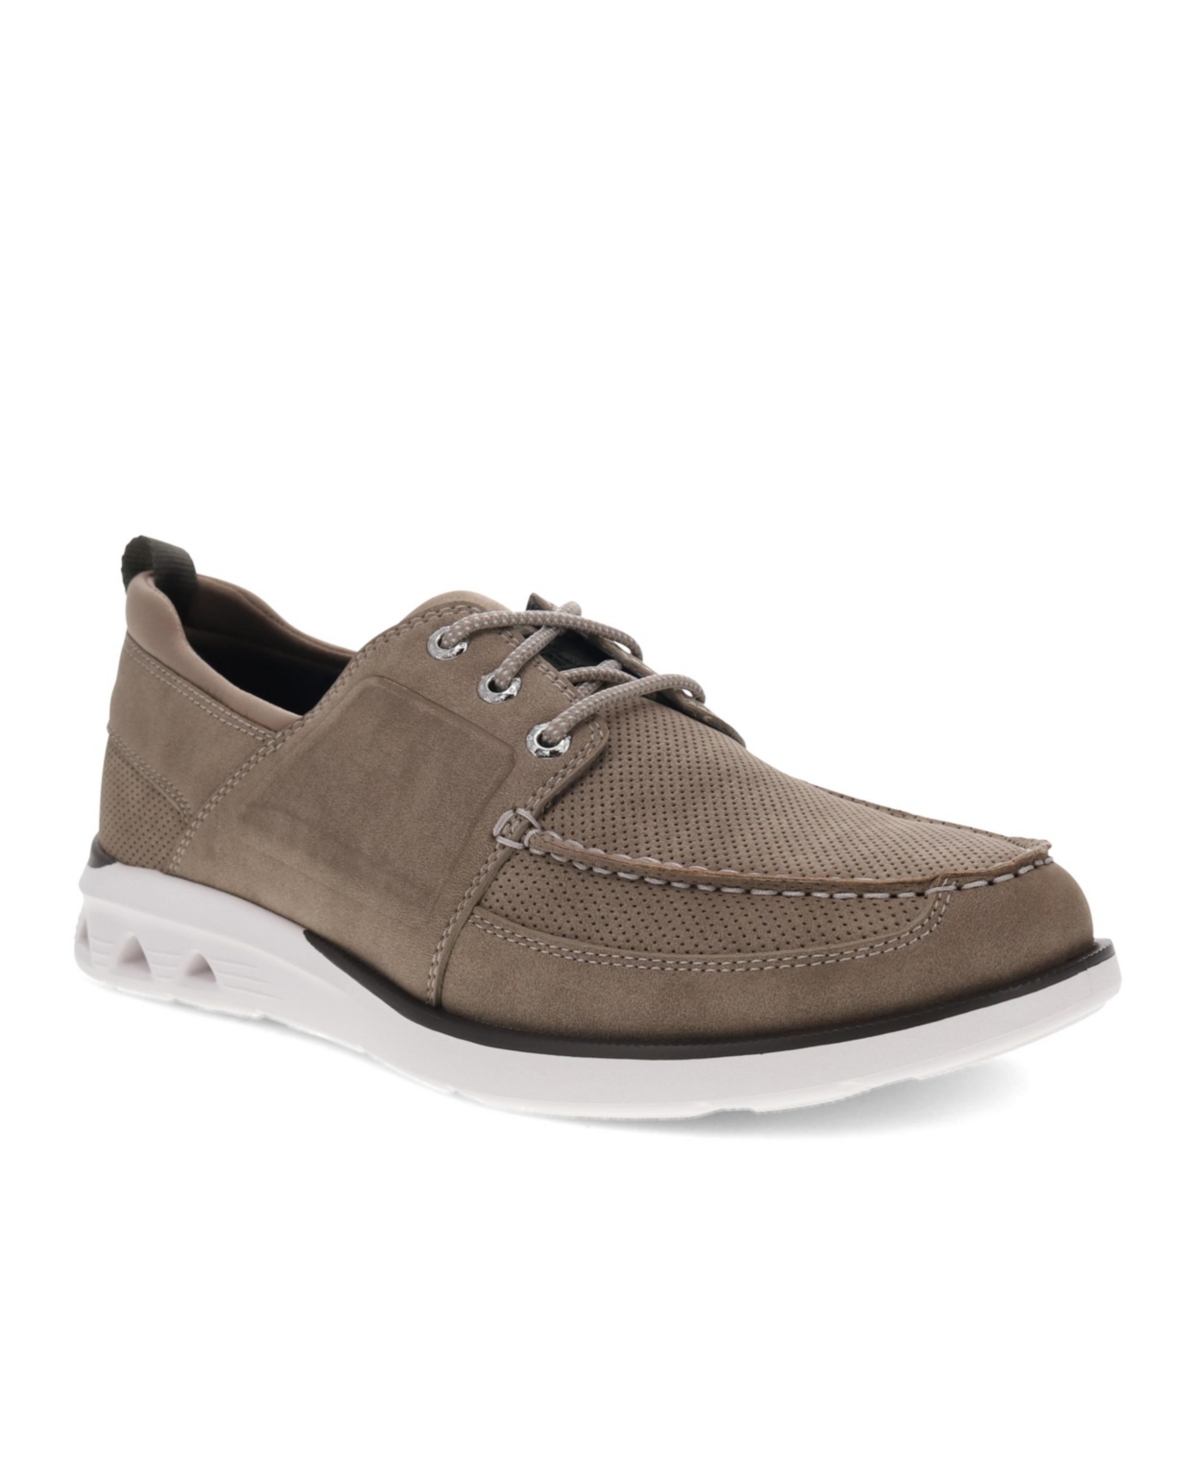 Men's Saunders Casual Boat Shoes - Taupe